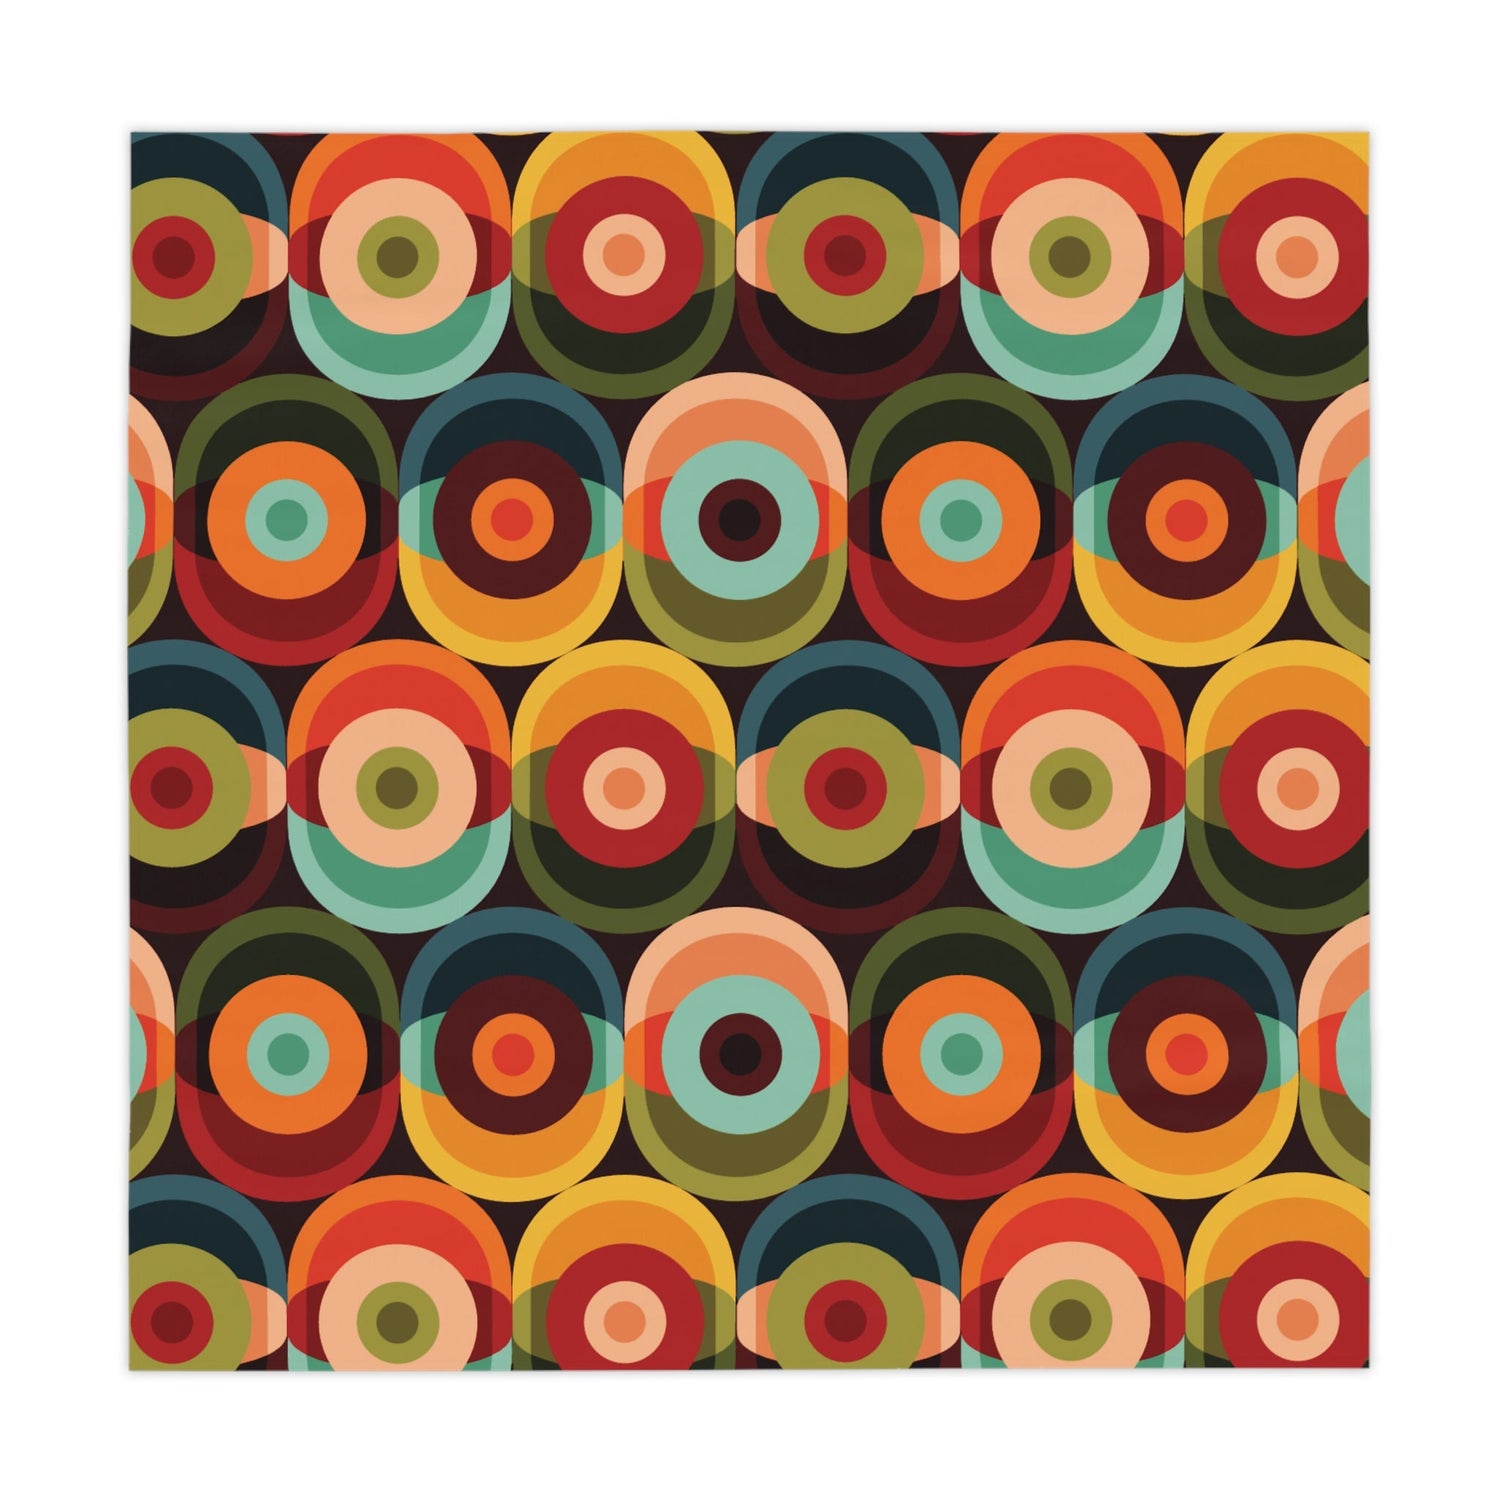 Kate McEnroe New York Retro Groovy Geometric Circle Orbs Tablecloth, 70s Mid Century Modern Psychedelic Abstract Table LinensTablecloths12921271530129230652